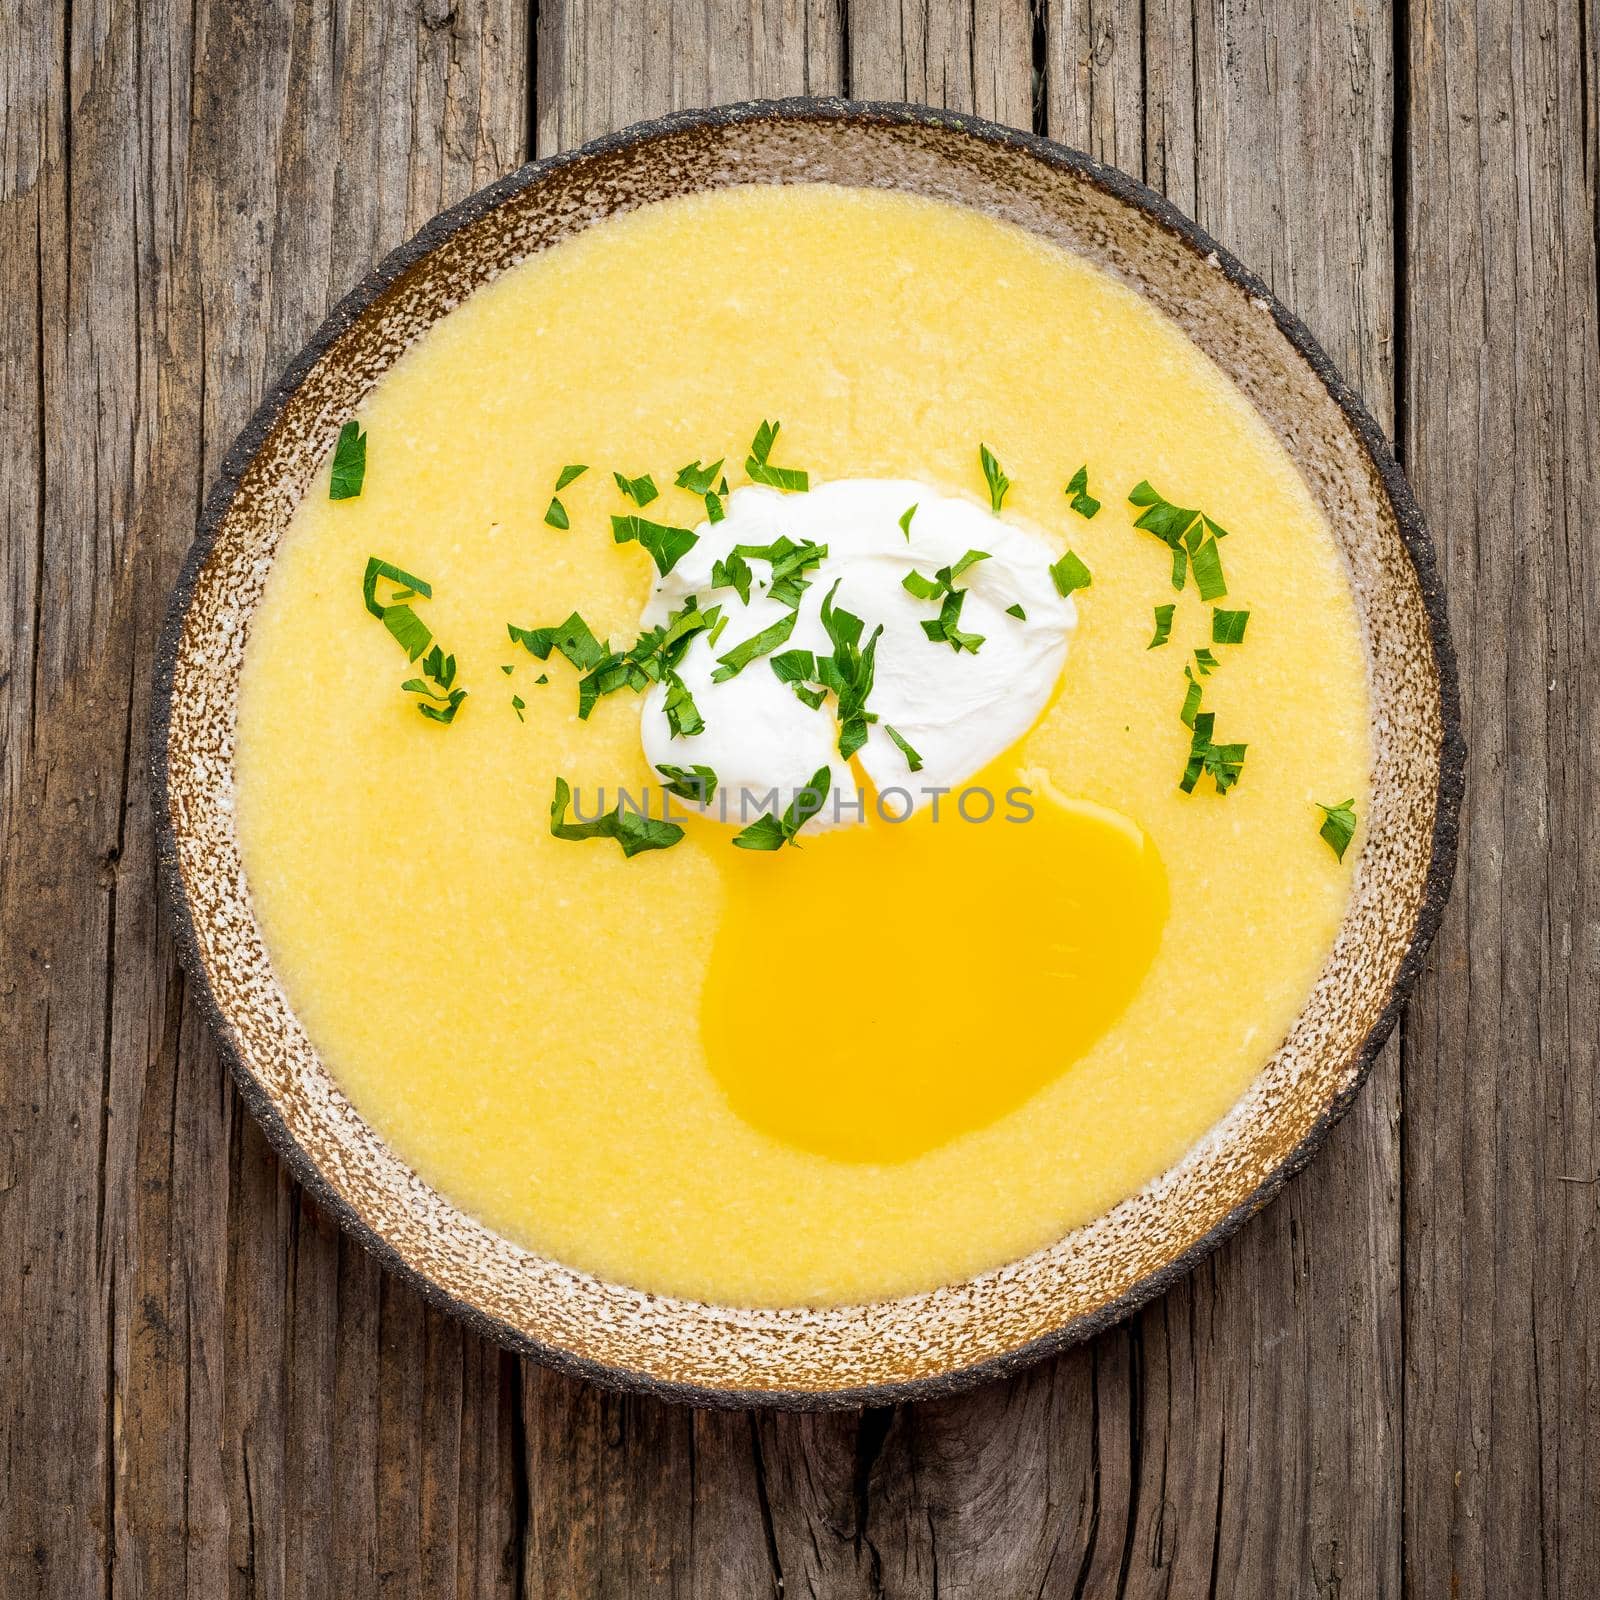 Polenta, porridge with Parmesan cheese and poached egg, by NataBene